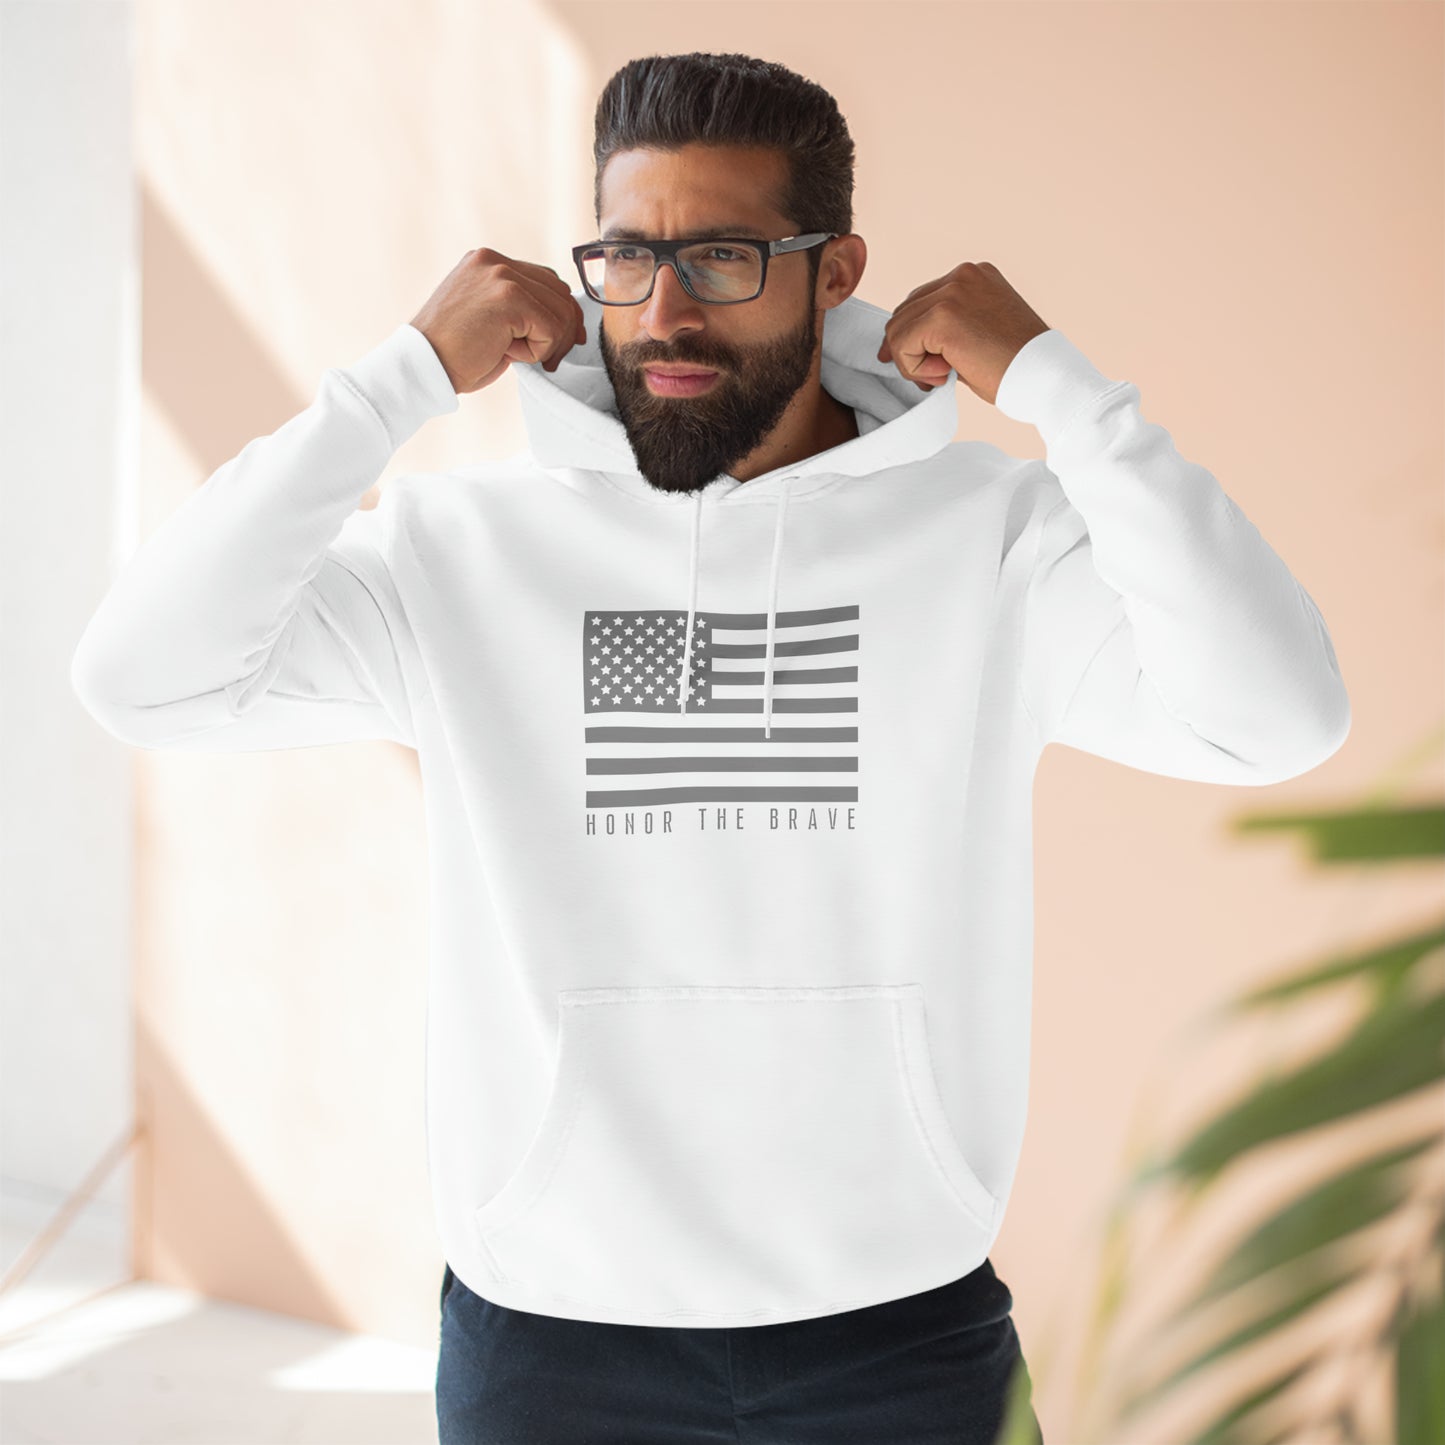 Honor The Brave -Grey/Black Out Flag- Premium Pullover Hoodie